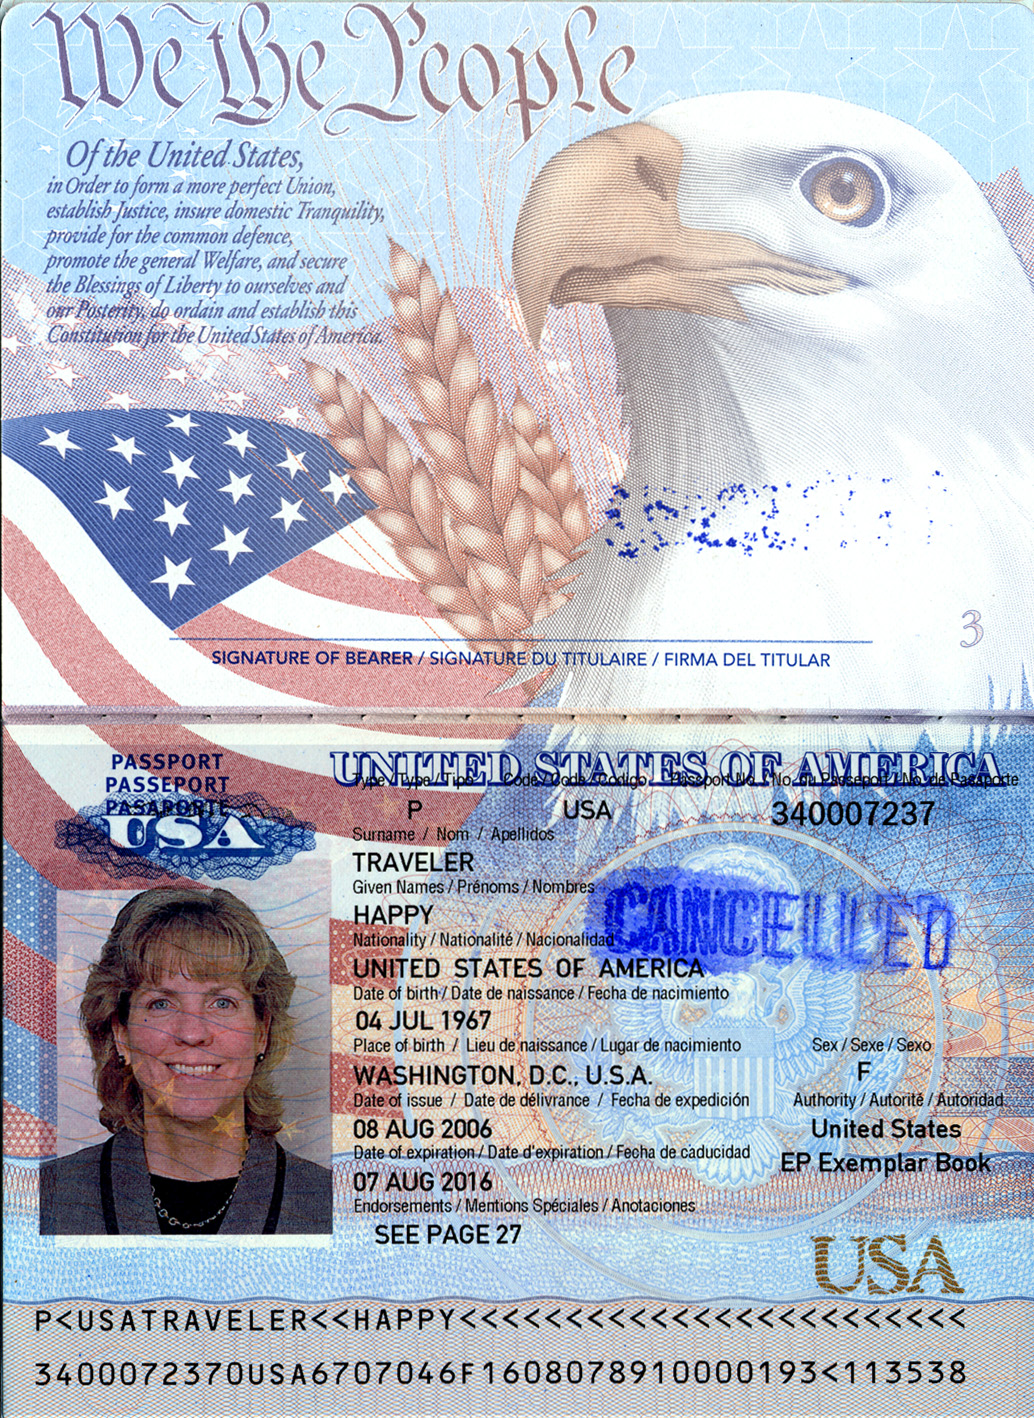 Image of the Inside of Passport